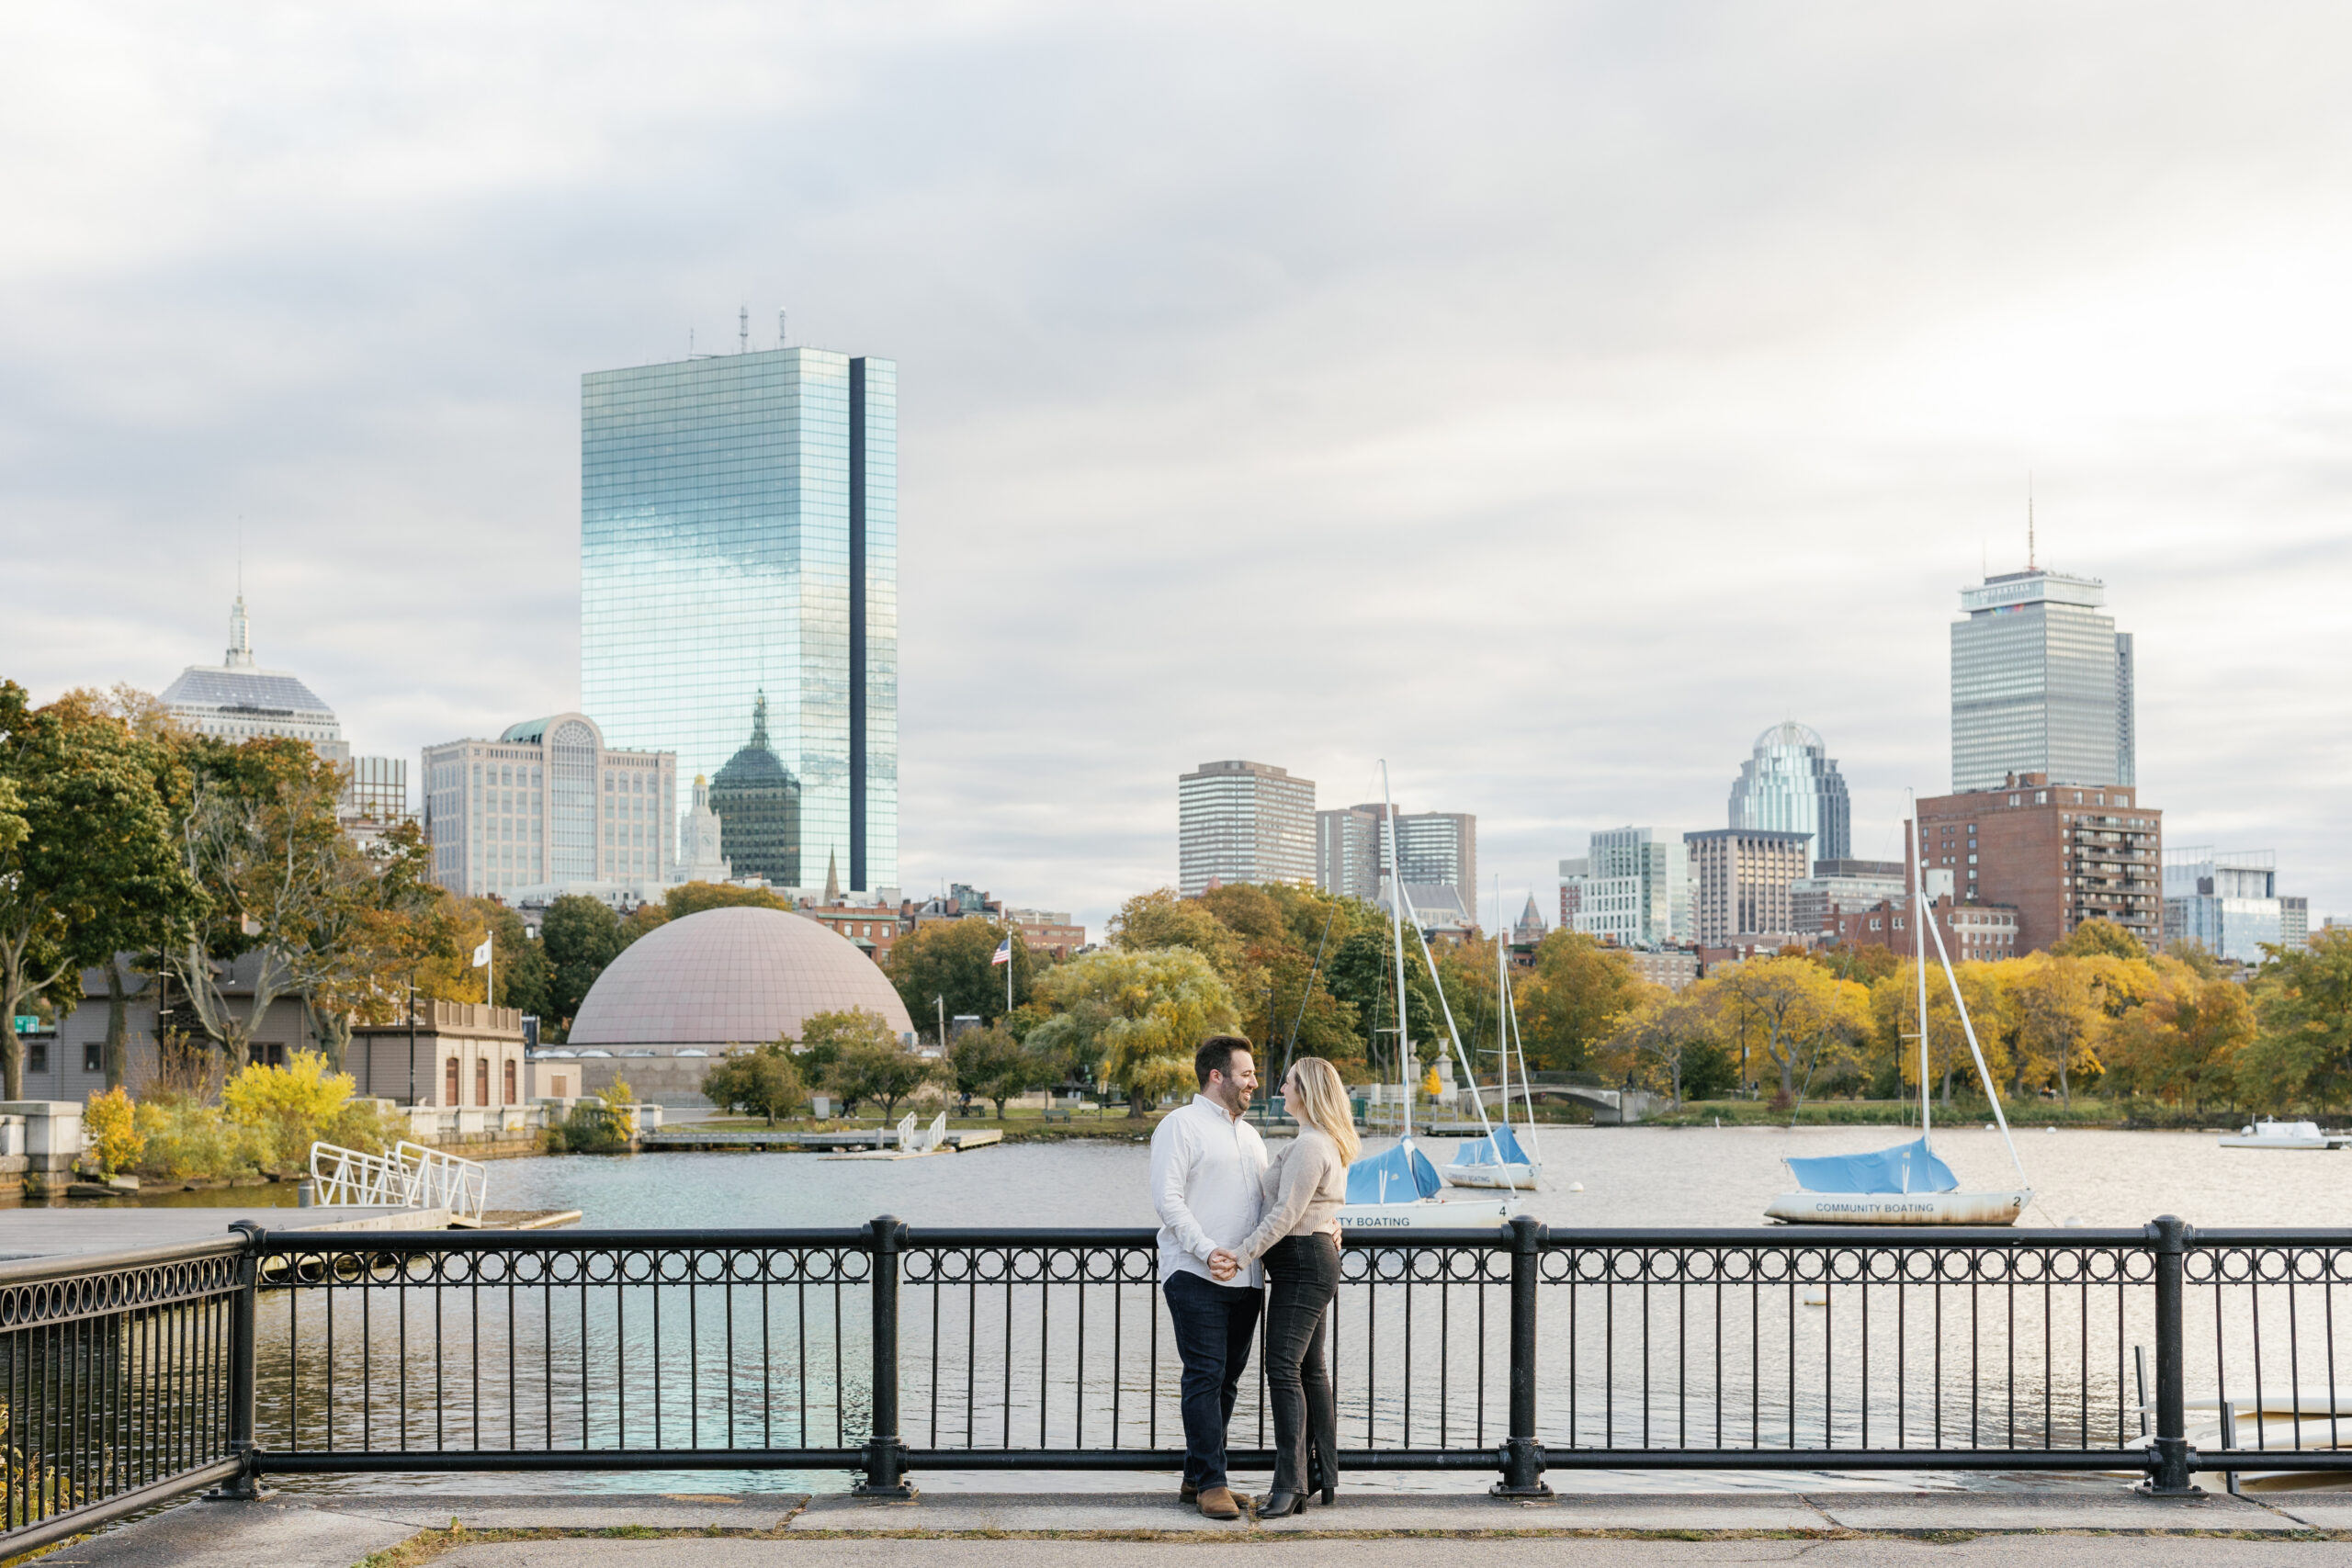 A romantic couple standing close, with a city riverfront and autumnal trees in the soft glow of the setting sun as their backdrop.